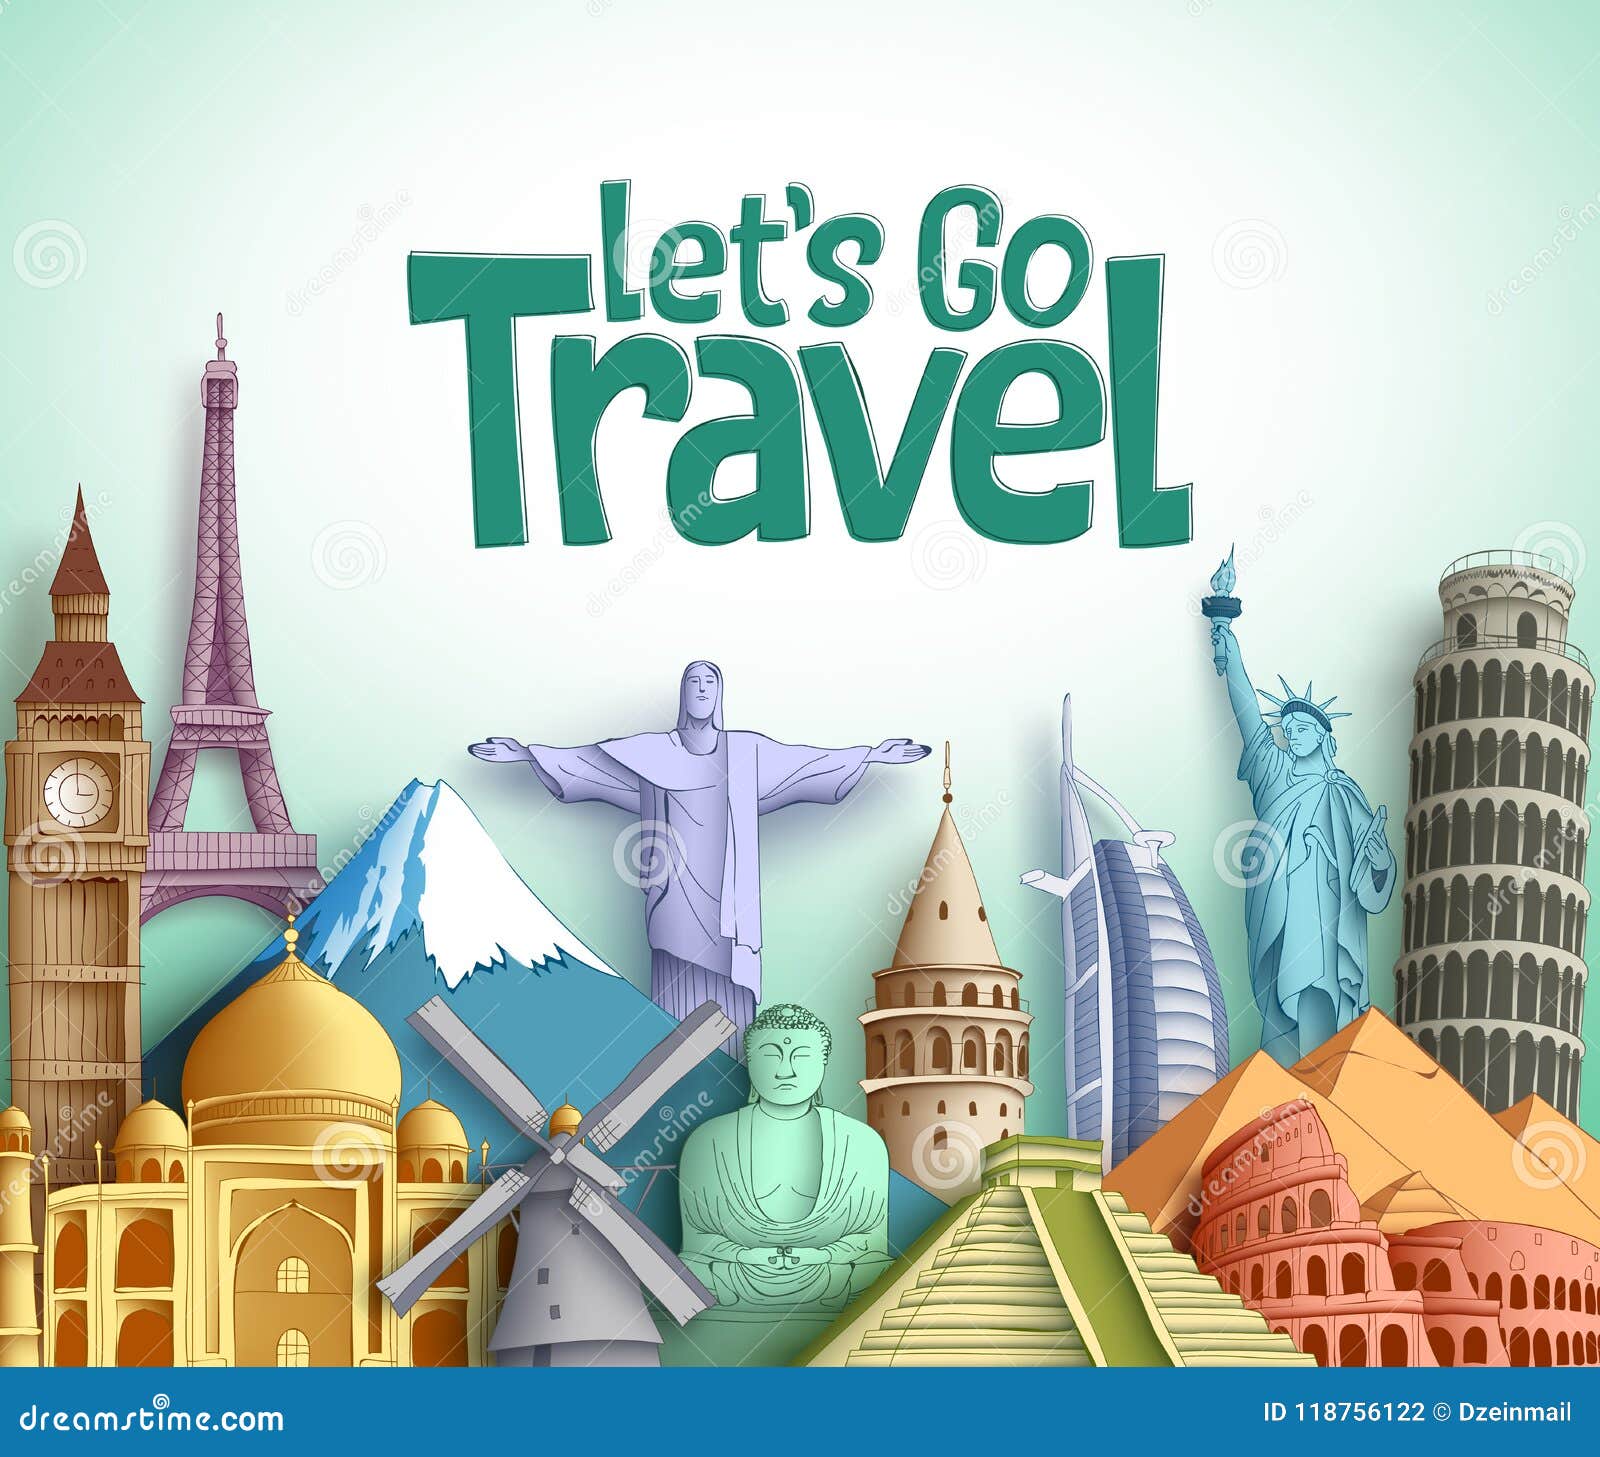 Travel and Tourism Vector Background Design with Let`s Go Travel Text ...